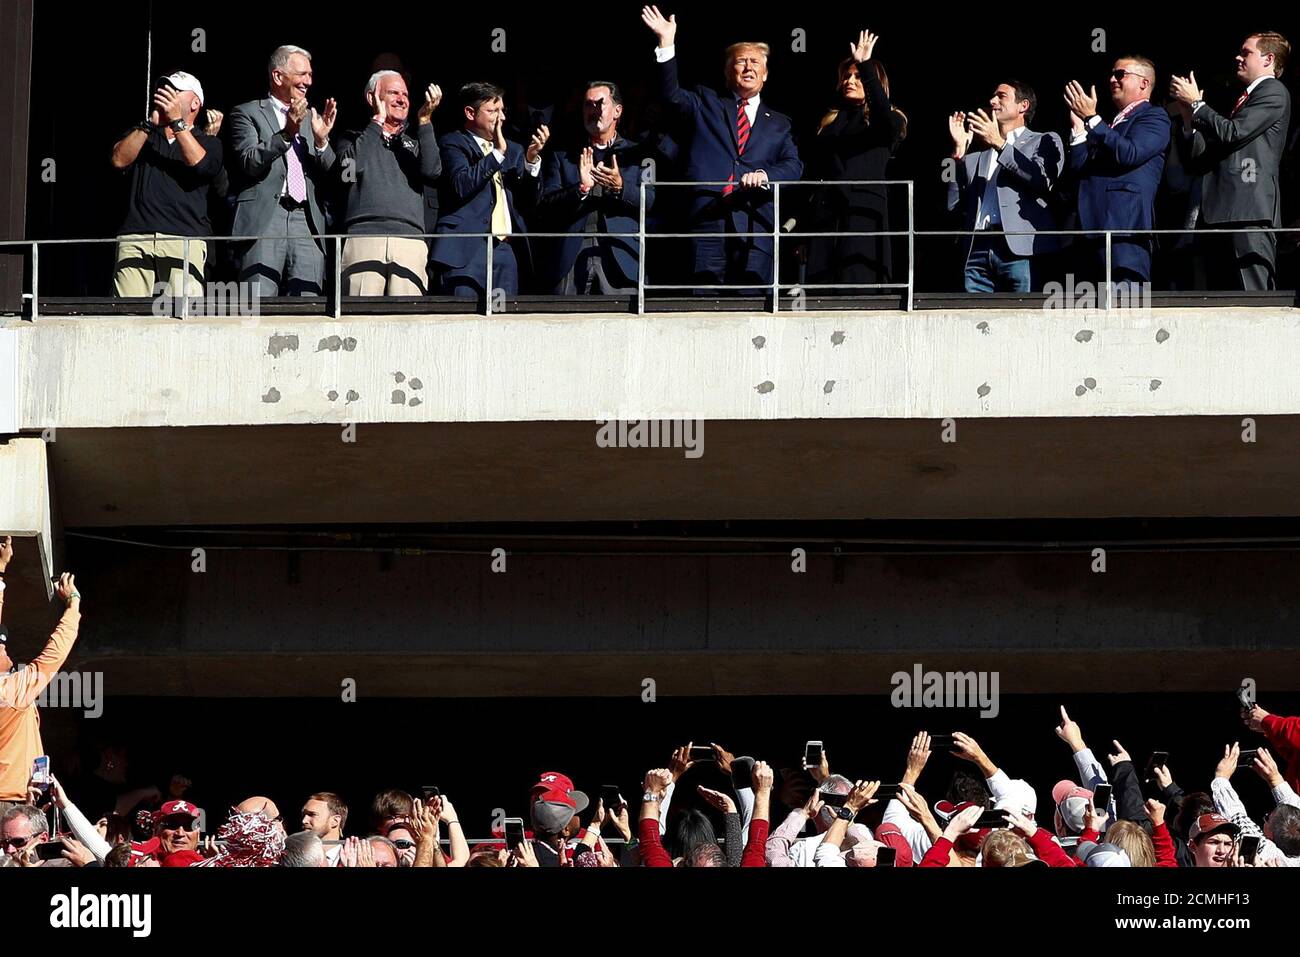 U.S. President Donald Trump and first lady Melania Trump wave to the crowd during an N.C.A.A. Division I college football game between Louisiana State University and University of Alabama at Bryant-Denny Stadium in Tuscaloosa, Alabama, U.S., November 9, 2019. REUTERS/Tom Brenner Stock Photo